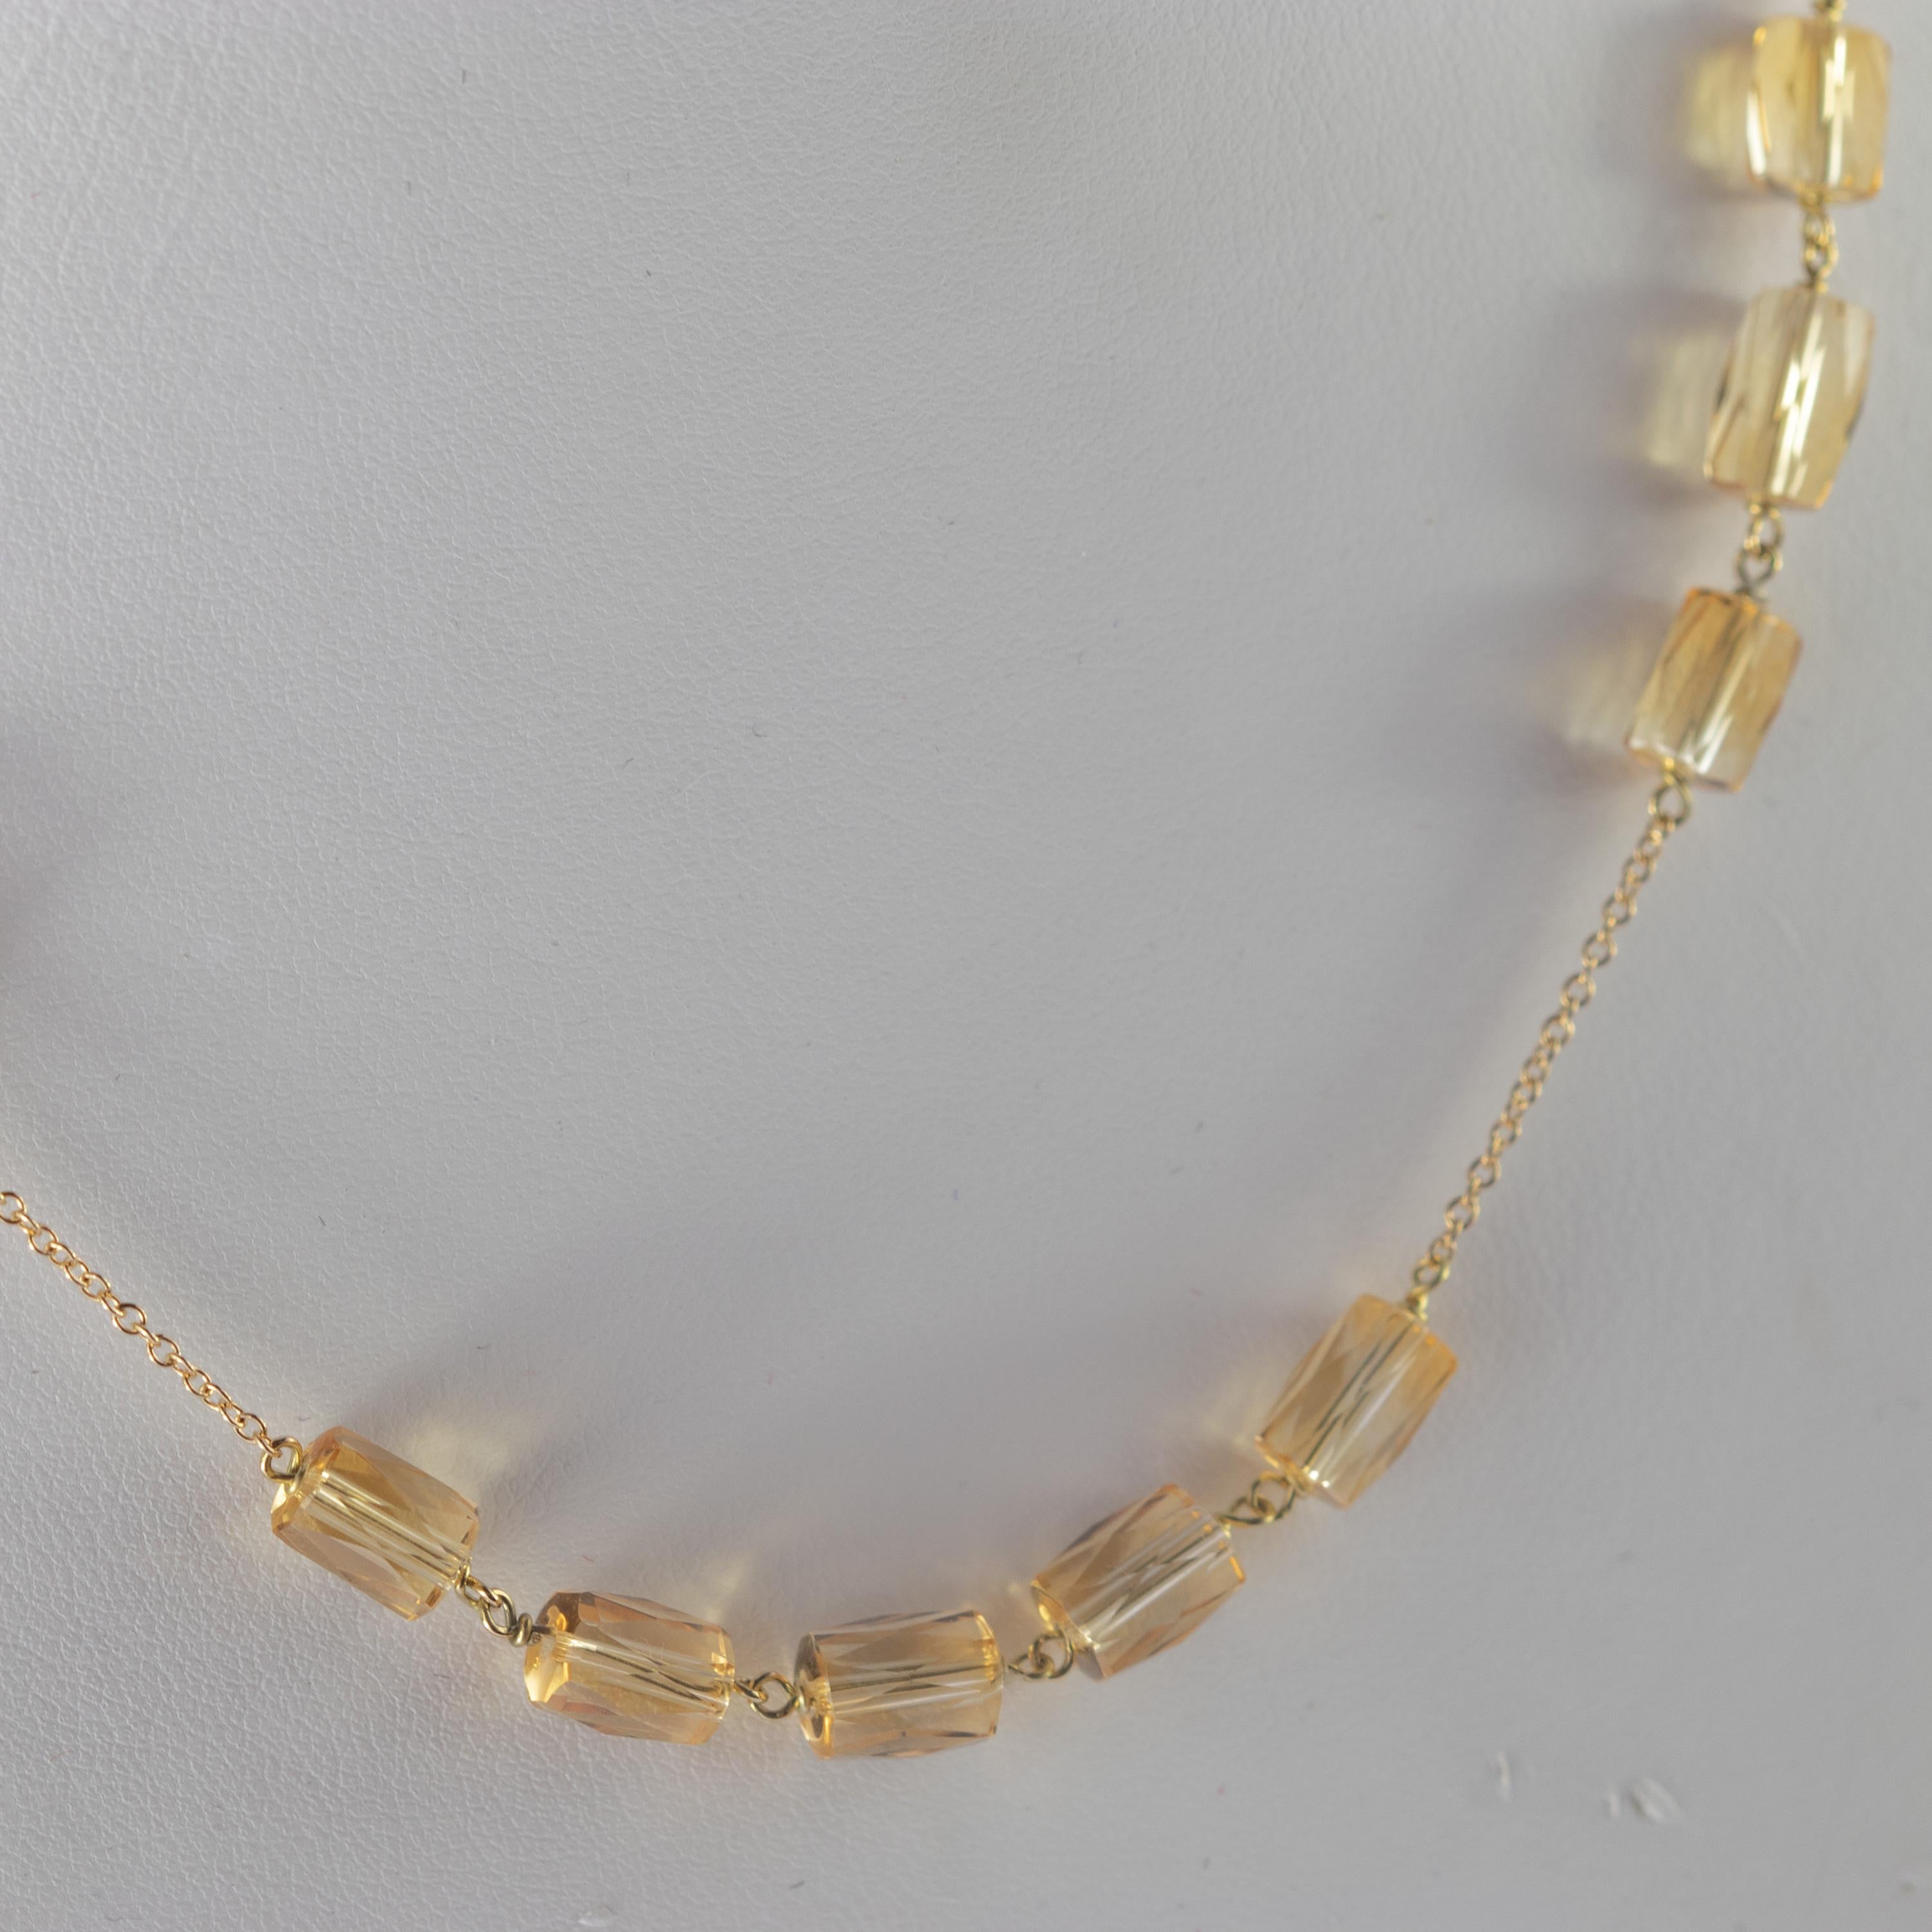 IIntini Jewels signature quality on a modern and contemporary design jewel.

Thirteen gems of top quality pure citrine quartz embellish a delicate 18 karat yellow gold chain necklace.
 
An elegant touch of glamour at your fingertips. Let yourself be